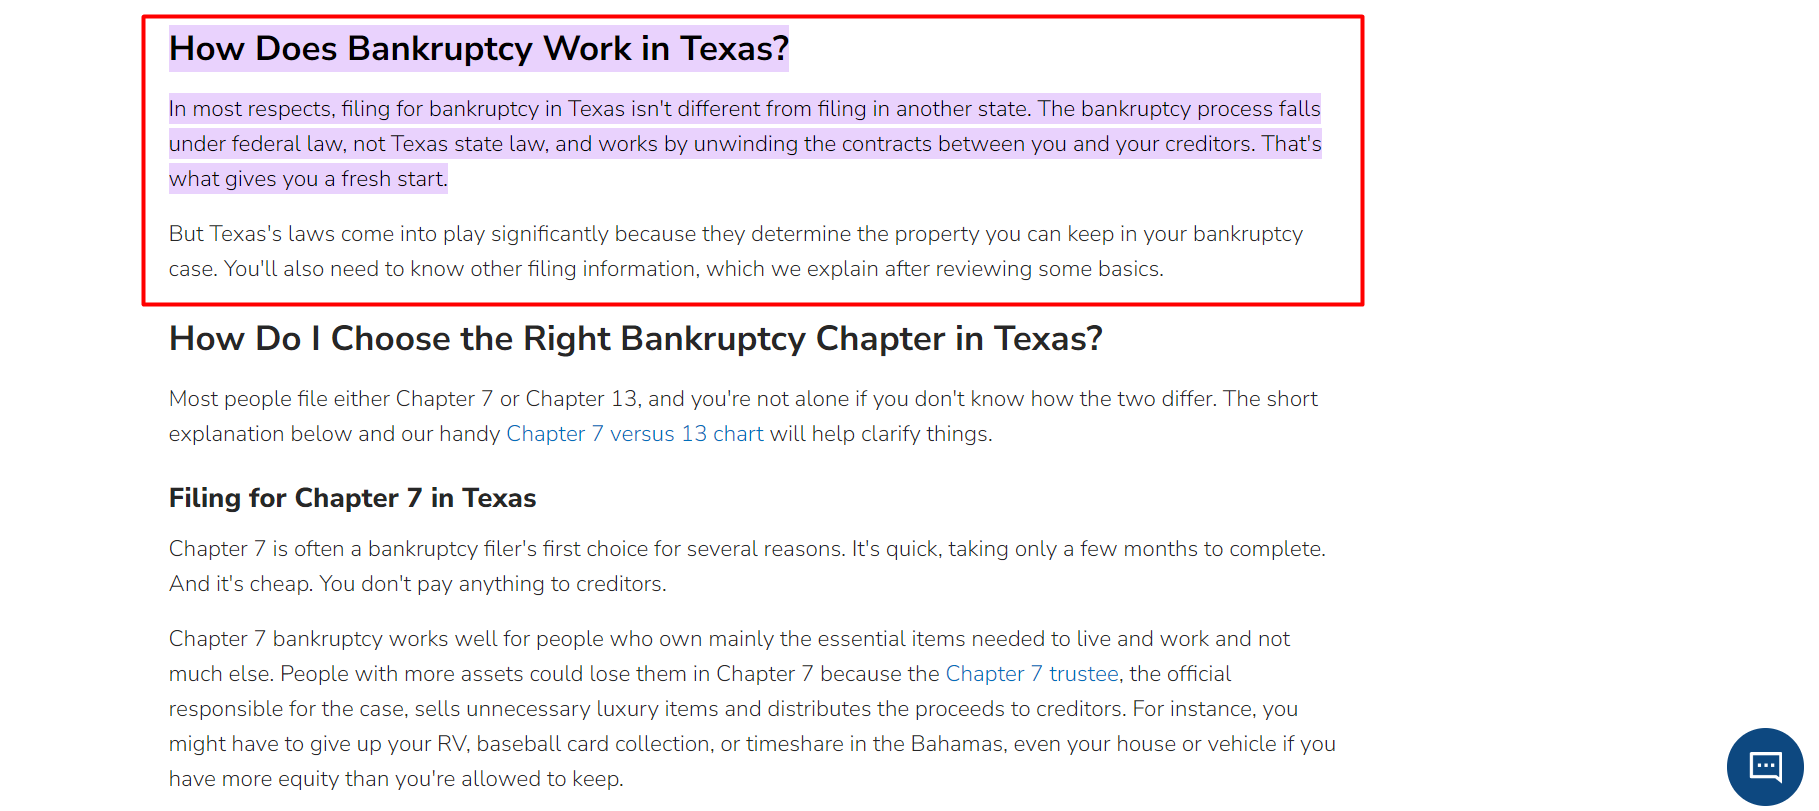 Screenshot of a webpage explaining bankruptcy in Texas. Highlighted text mentions the difference in processes for declaring bankruptcy in Texas compared to other states, emphasizing Dallas-specific laws and benefits.